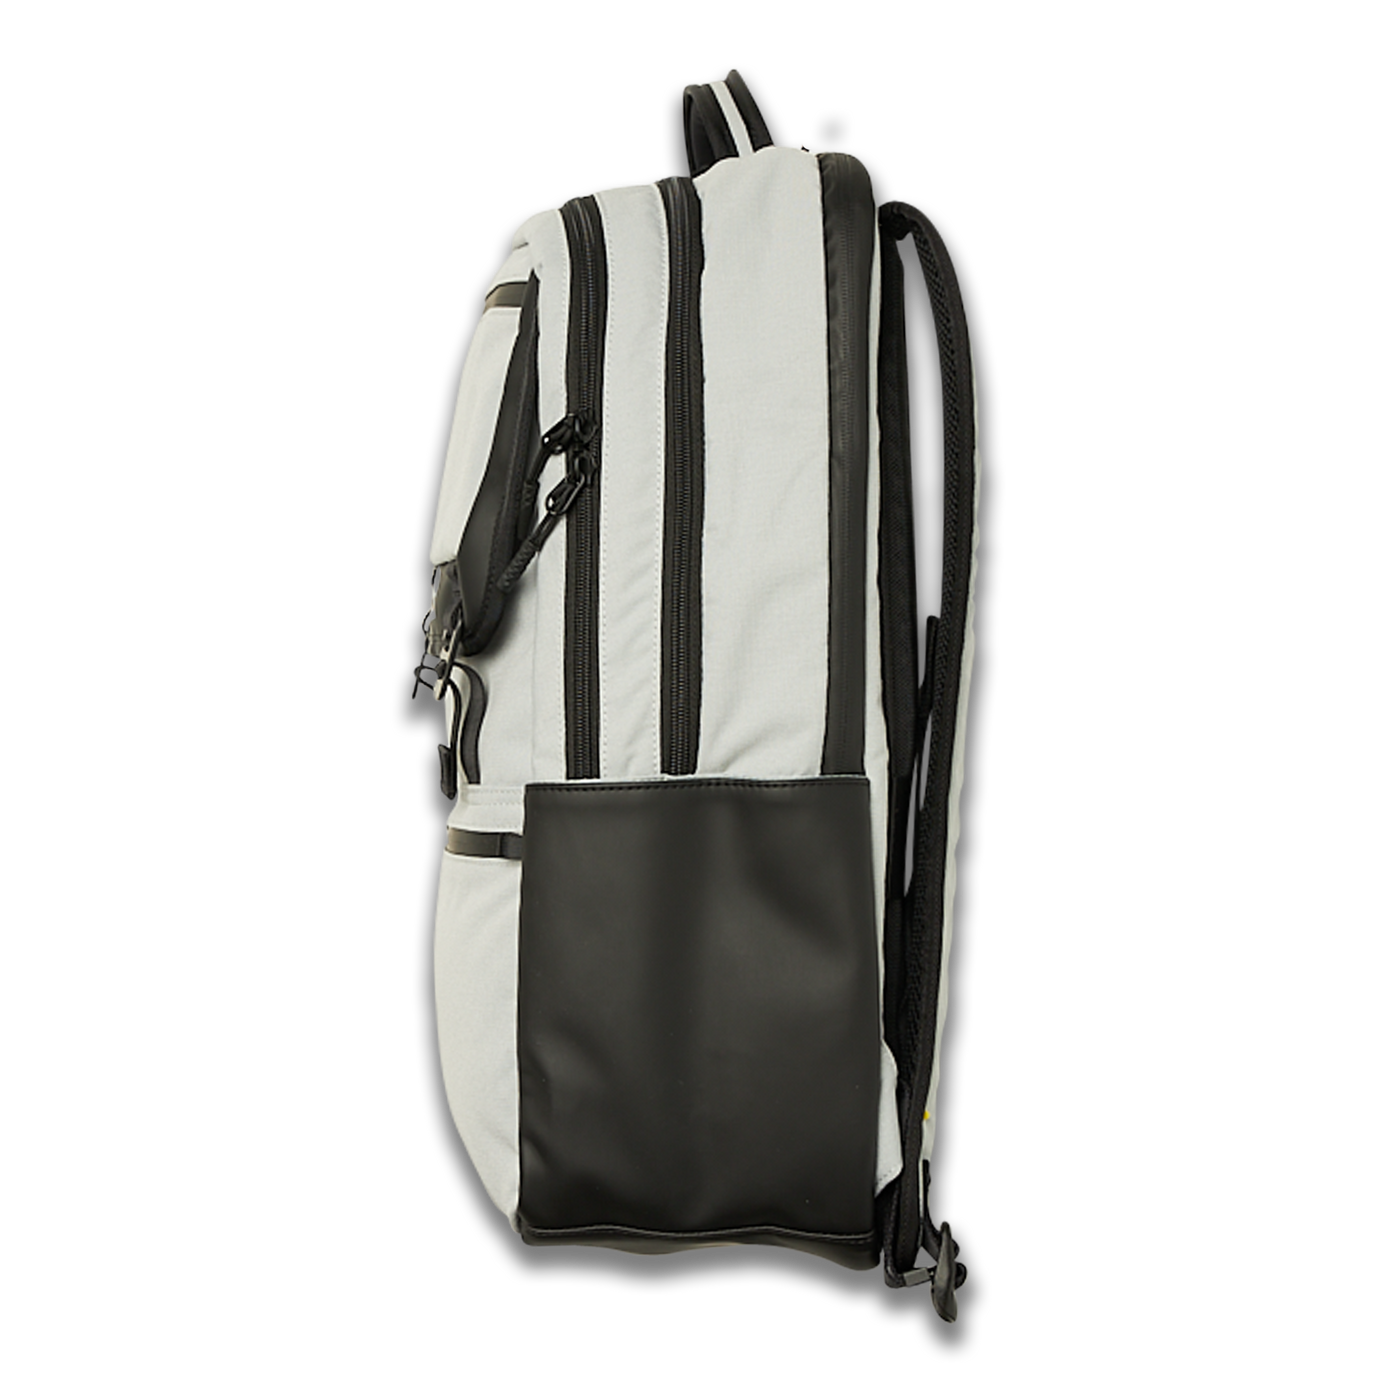 A2 Backpack R - Moon Gray